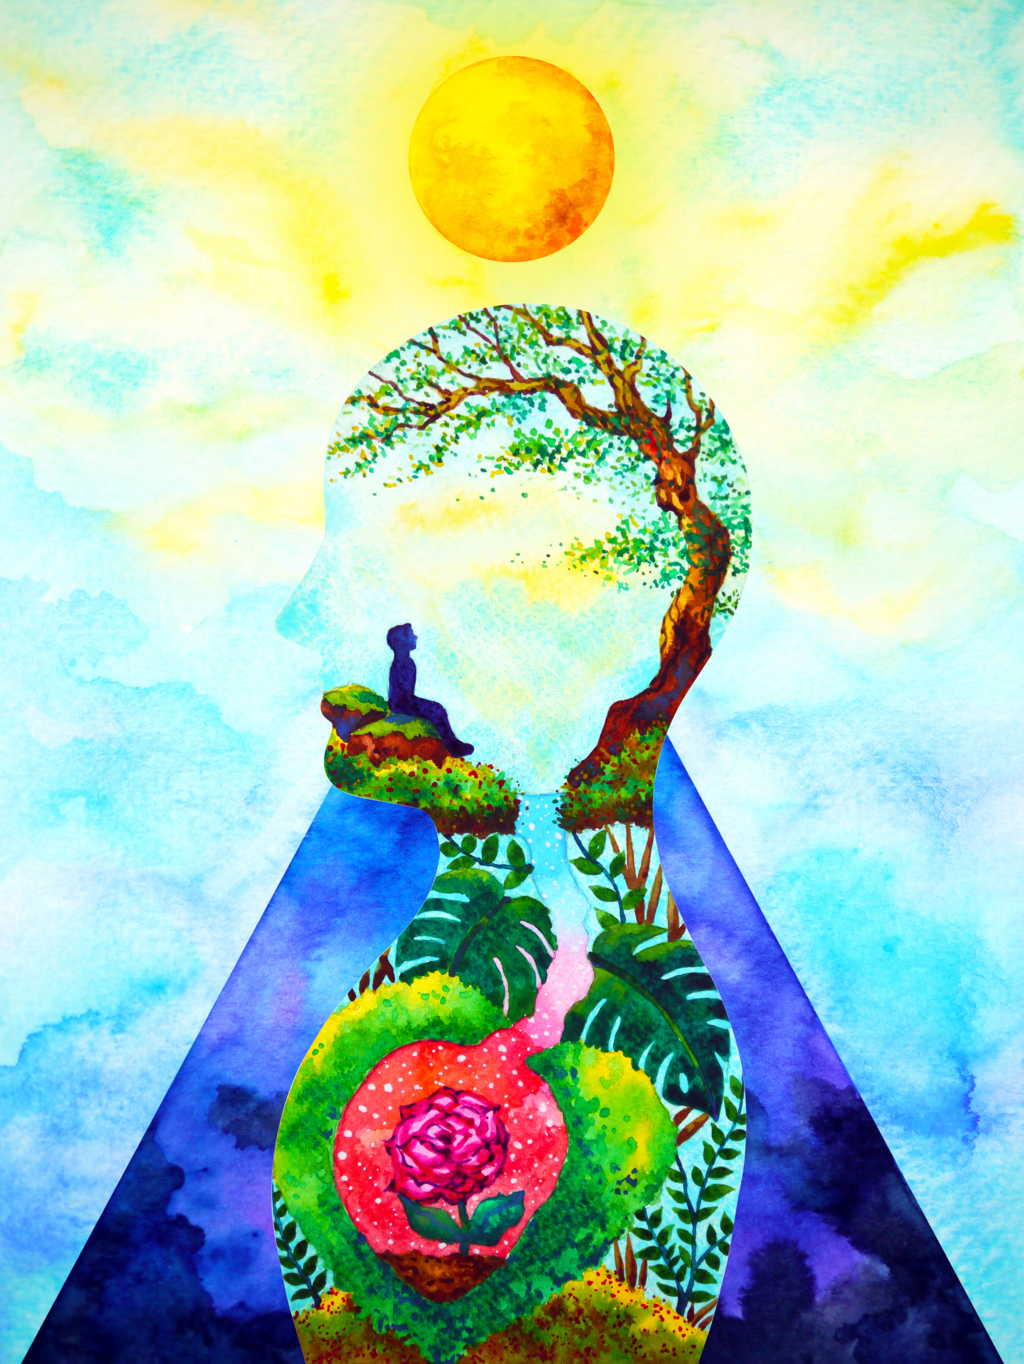 Artistic painting meditation under a tree, rose deep in heart of earth